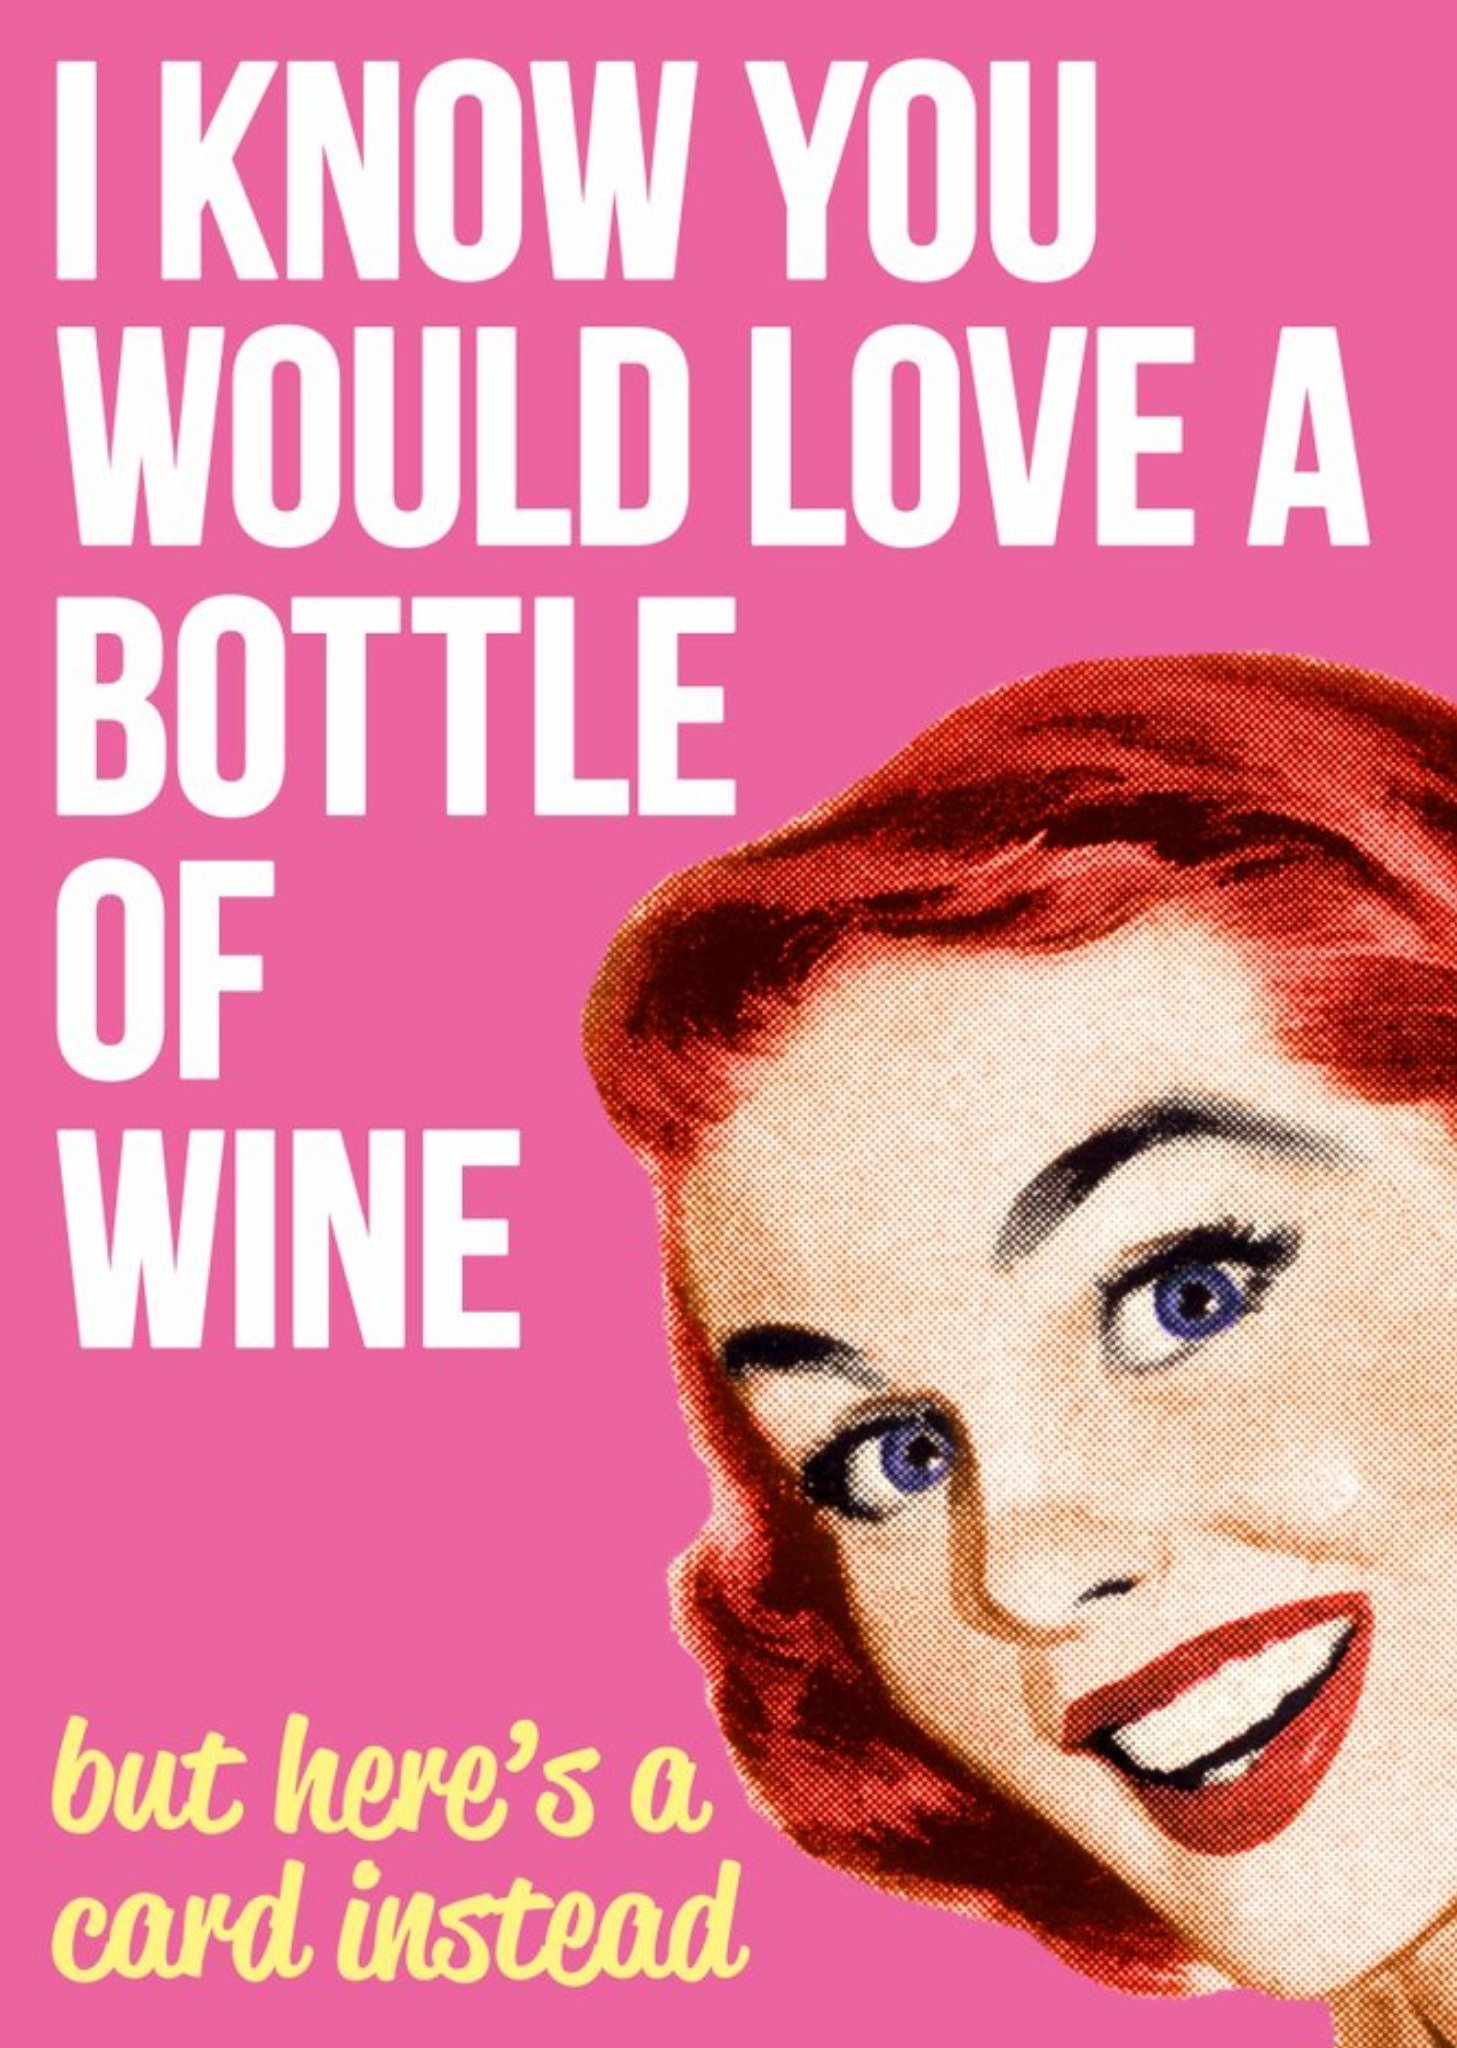 Moonpig I Know You Would Like A Bottle Of Wine Funny Retro Card Ecard